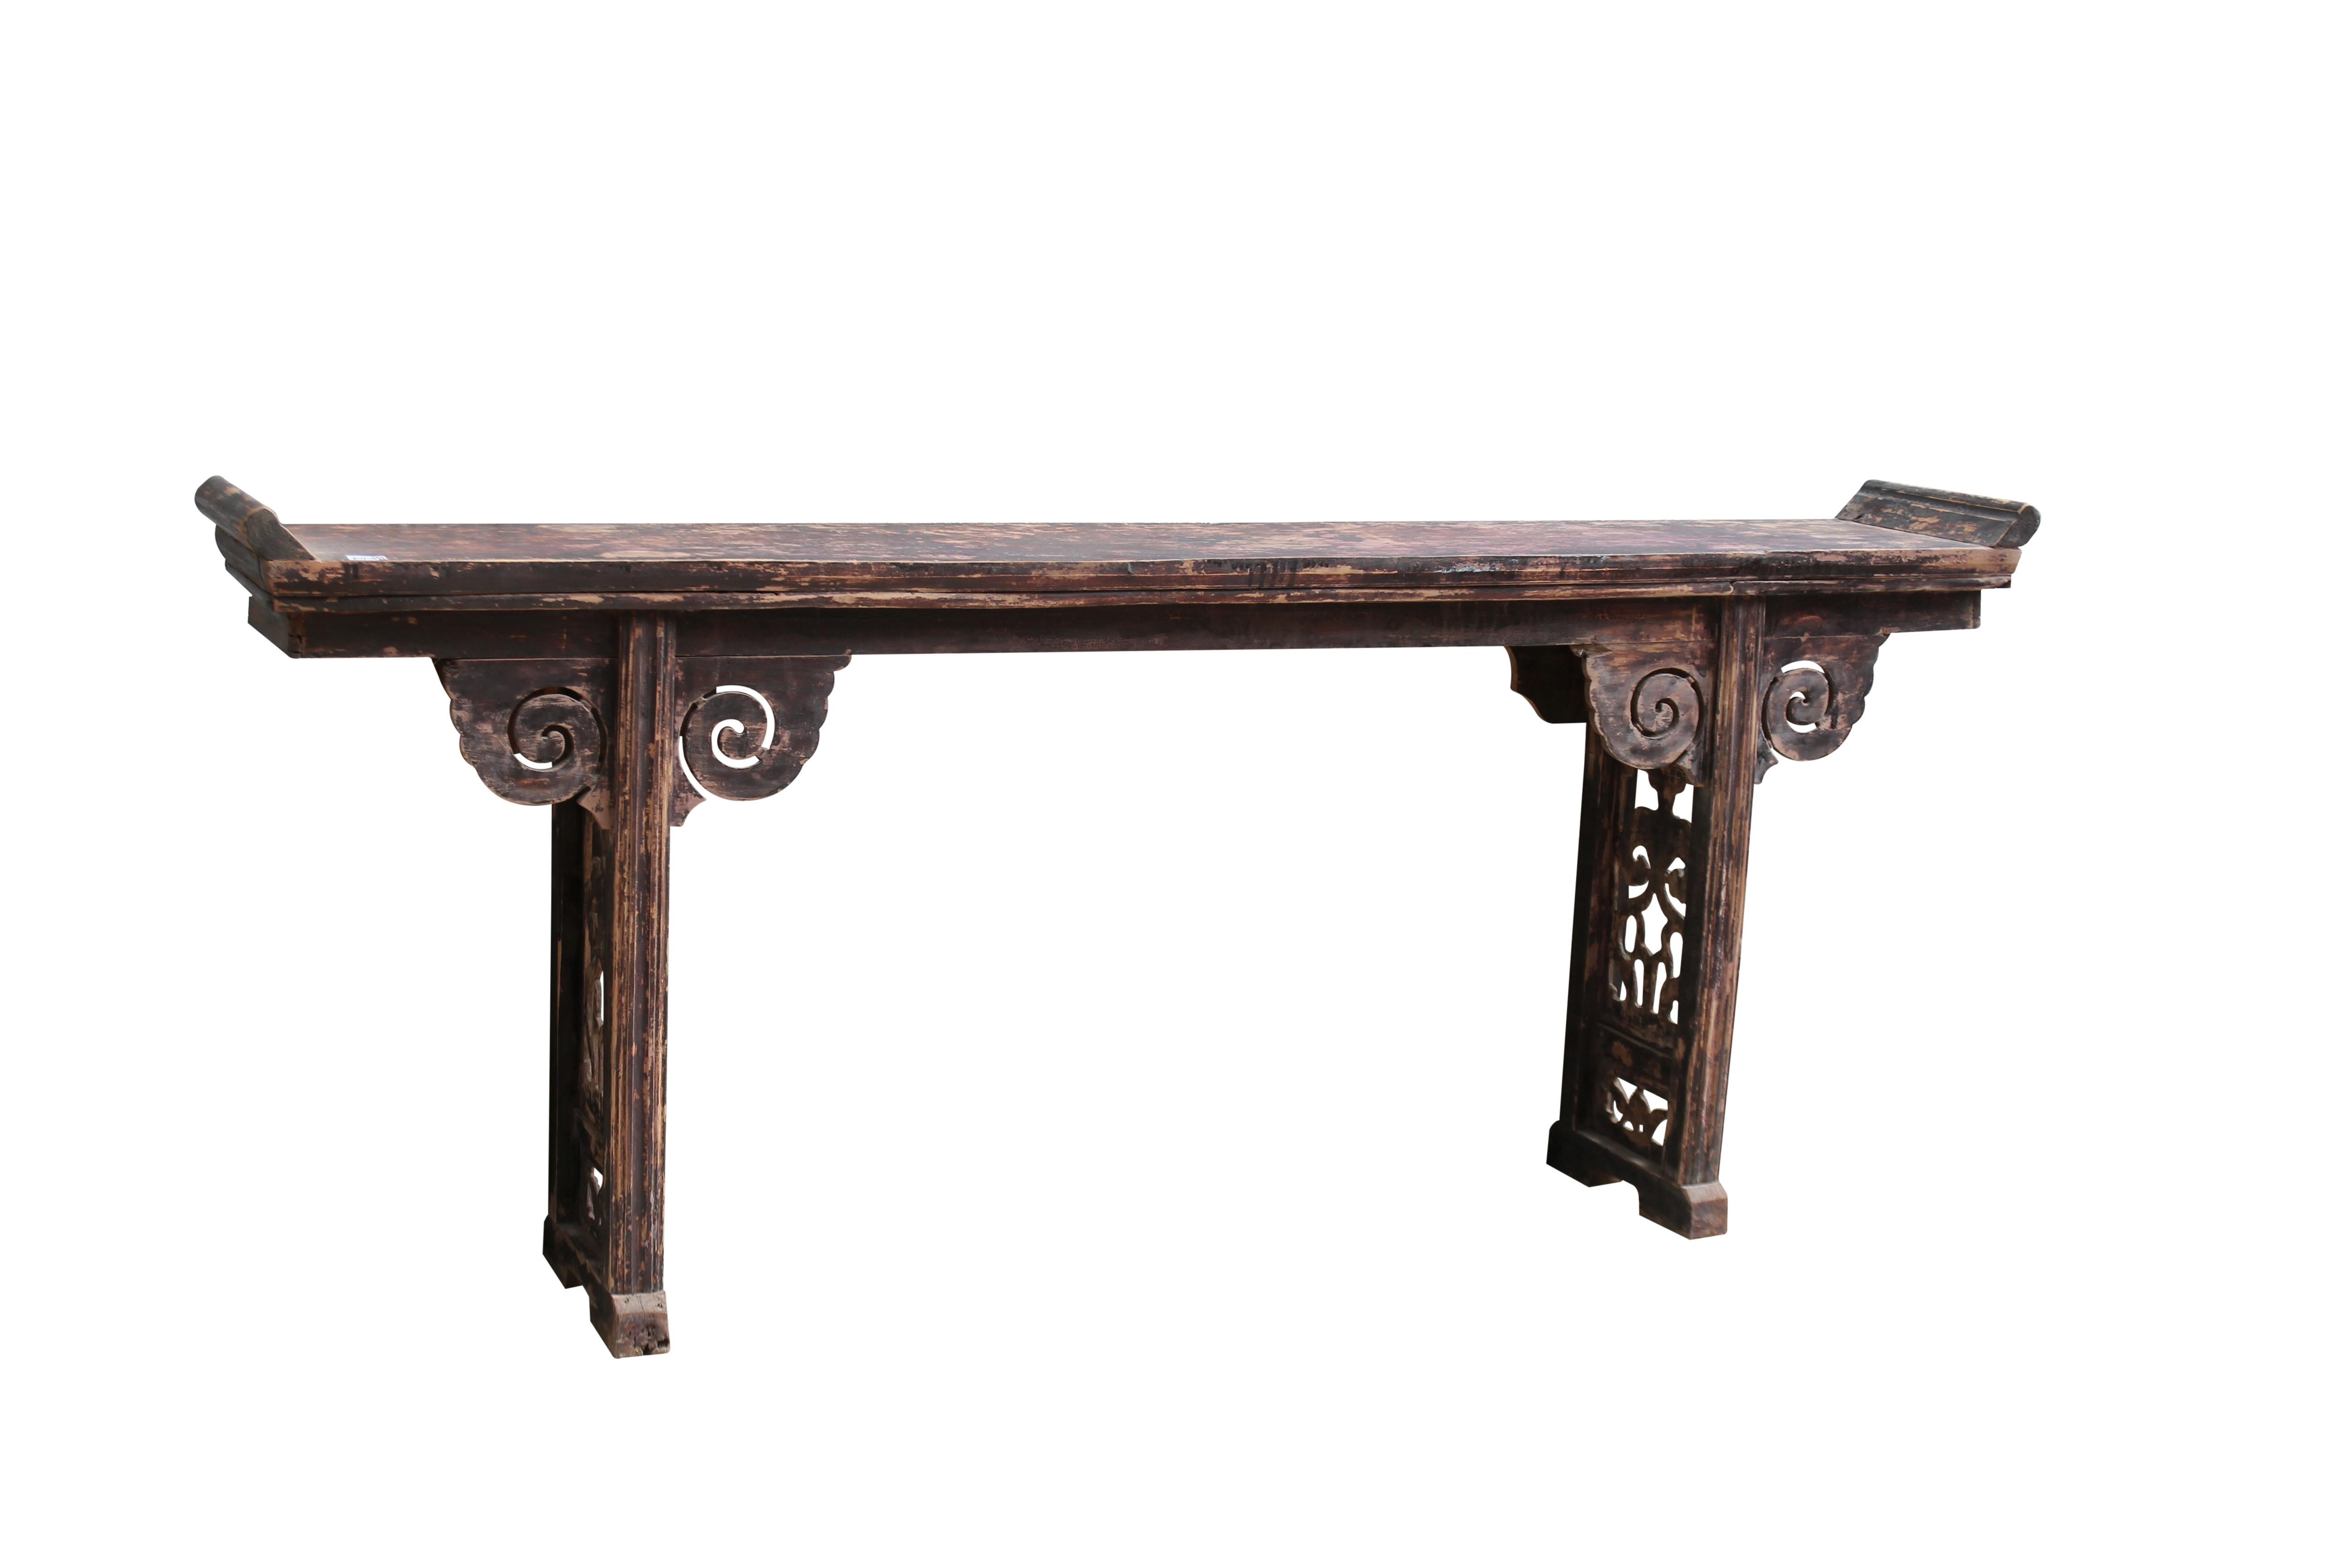 This reddish brown Chinese altar table with everted ends is adorned by a pair cloud spandrels and beautifully carved bat panel legs. This console table will make an impressive Asian console table or serving table in a living room, dining room, hall